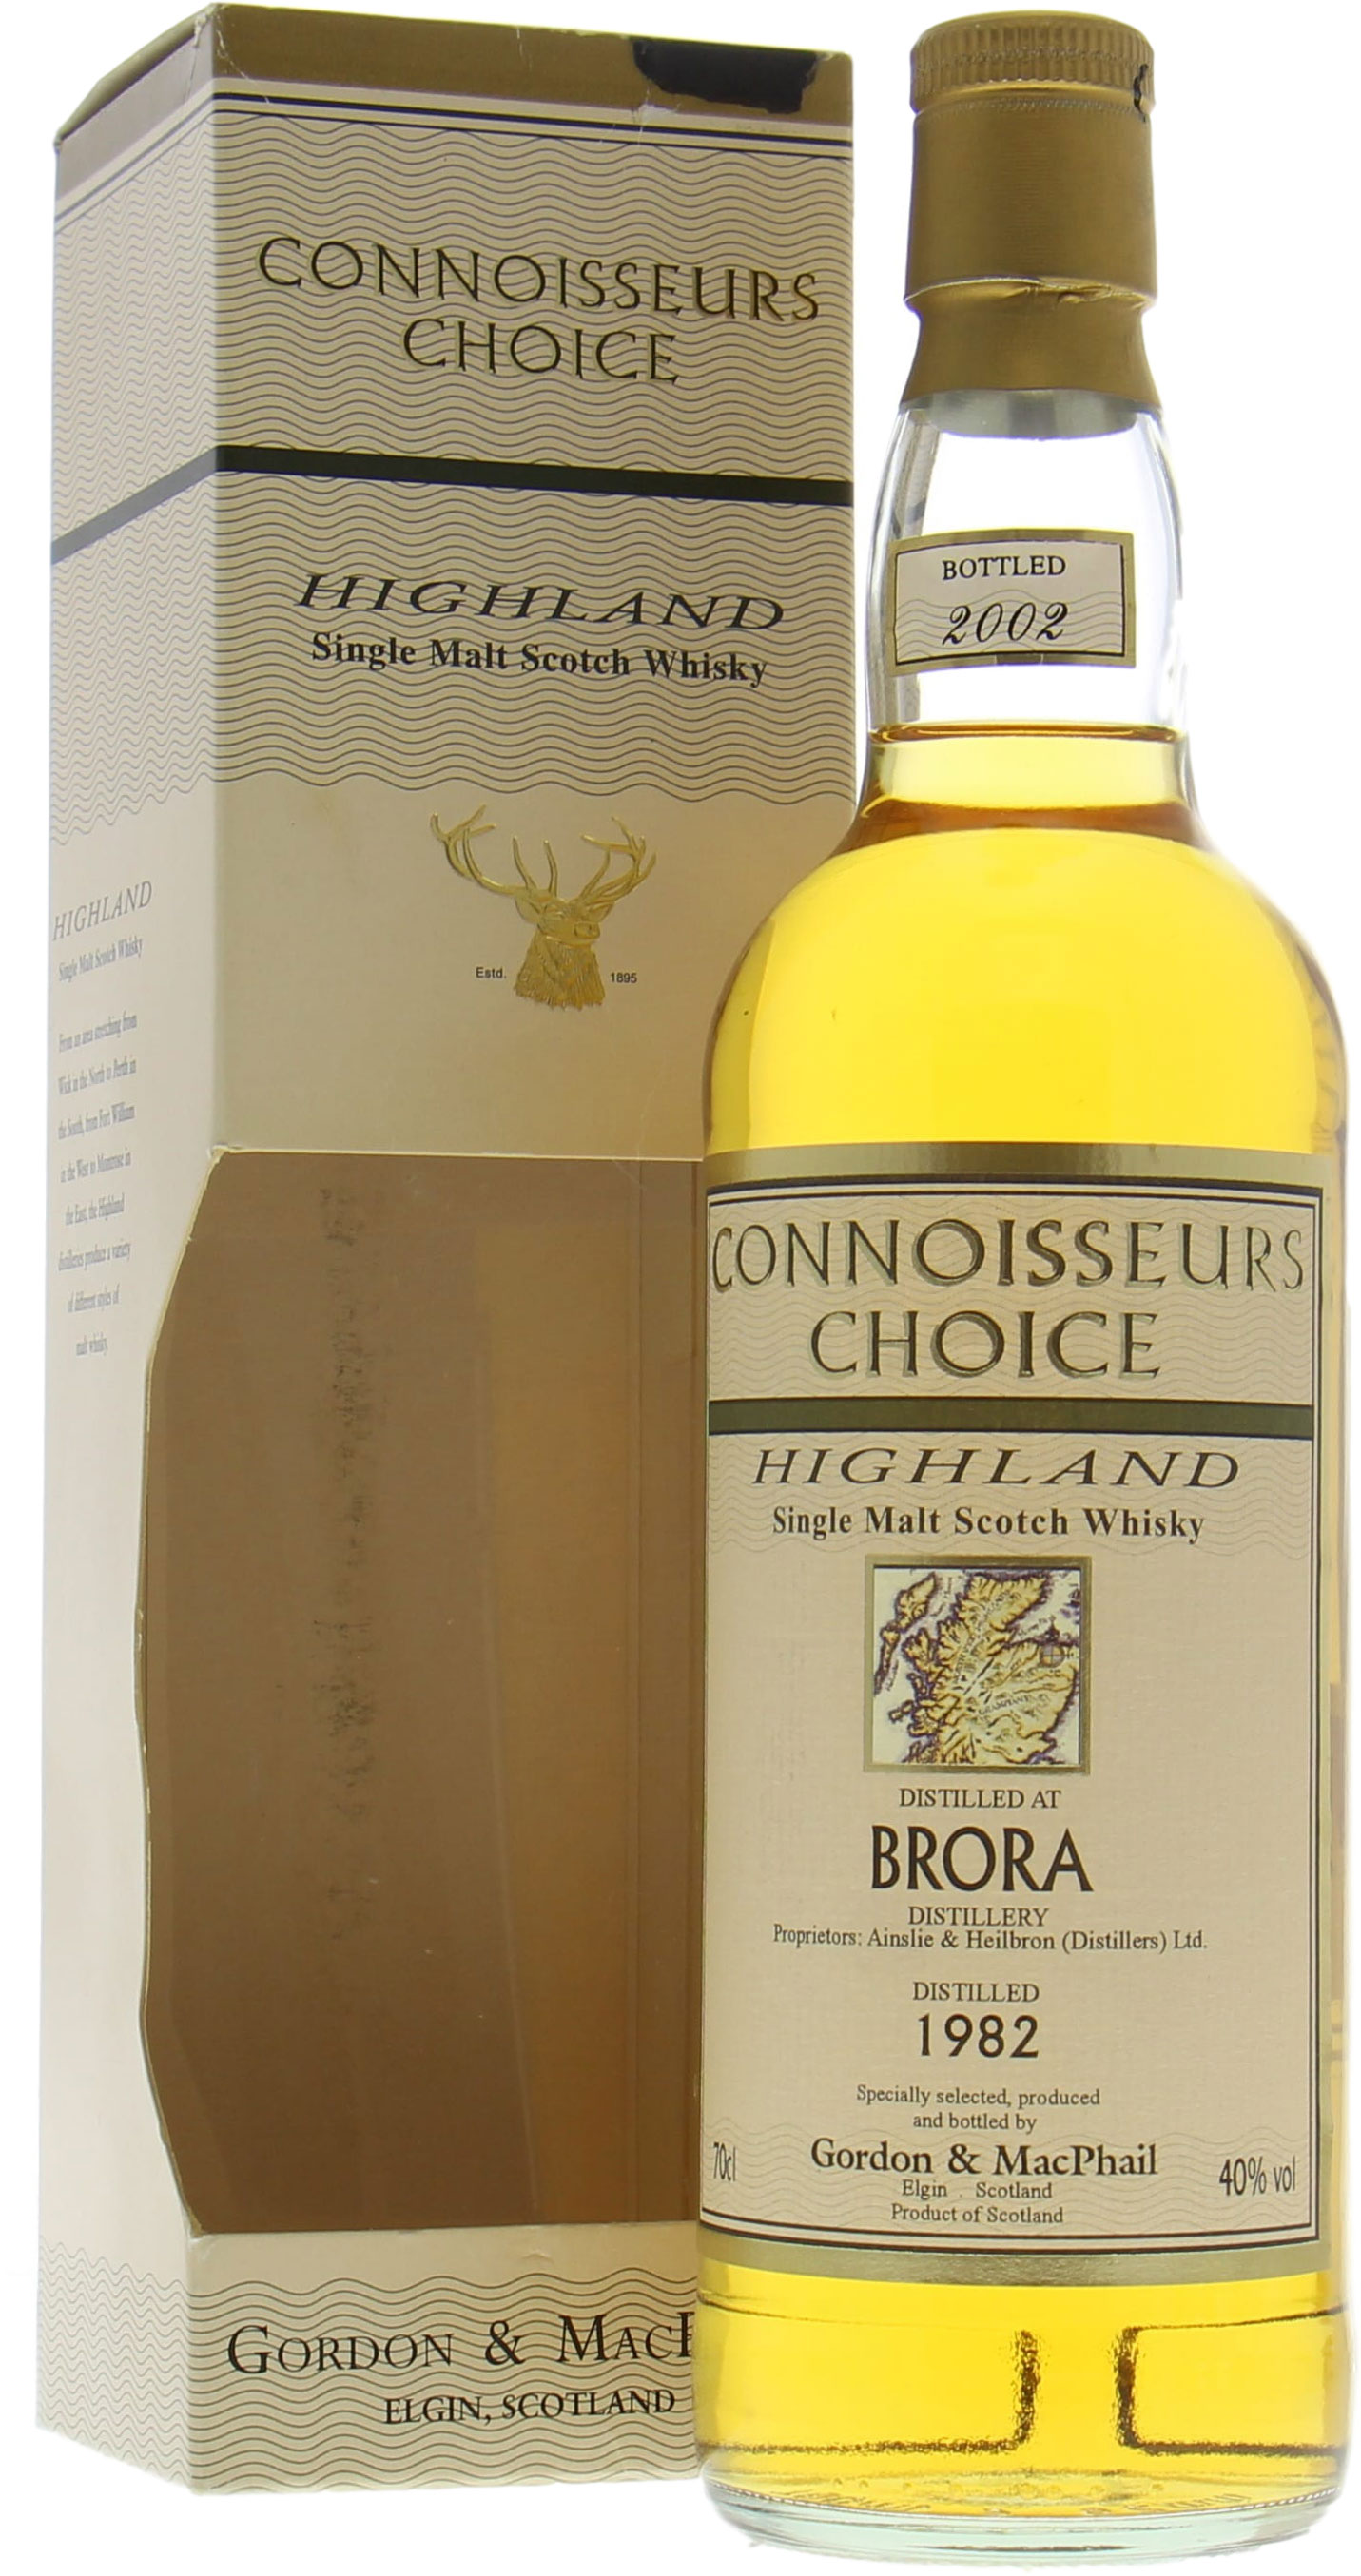 Brora - 1982 Gordon & MacPhail Connoisseurs Choice New map Label 40% 1982 In Original Container